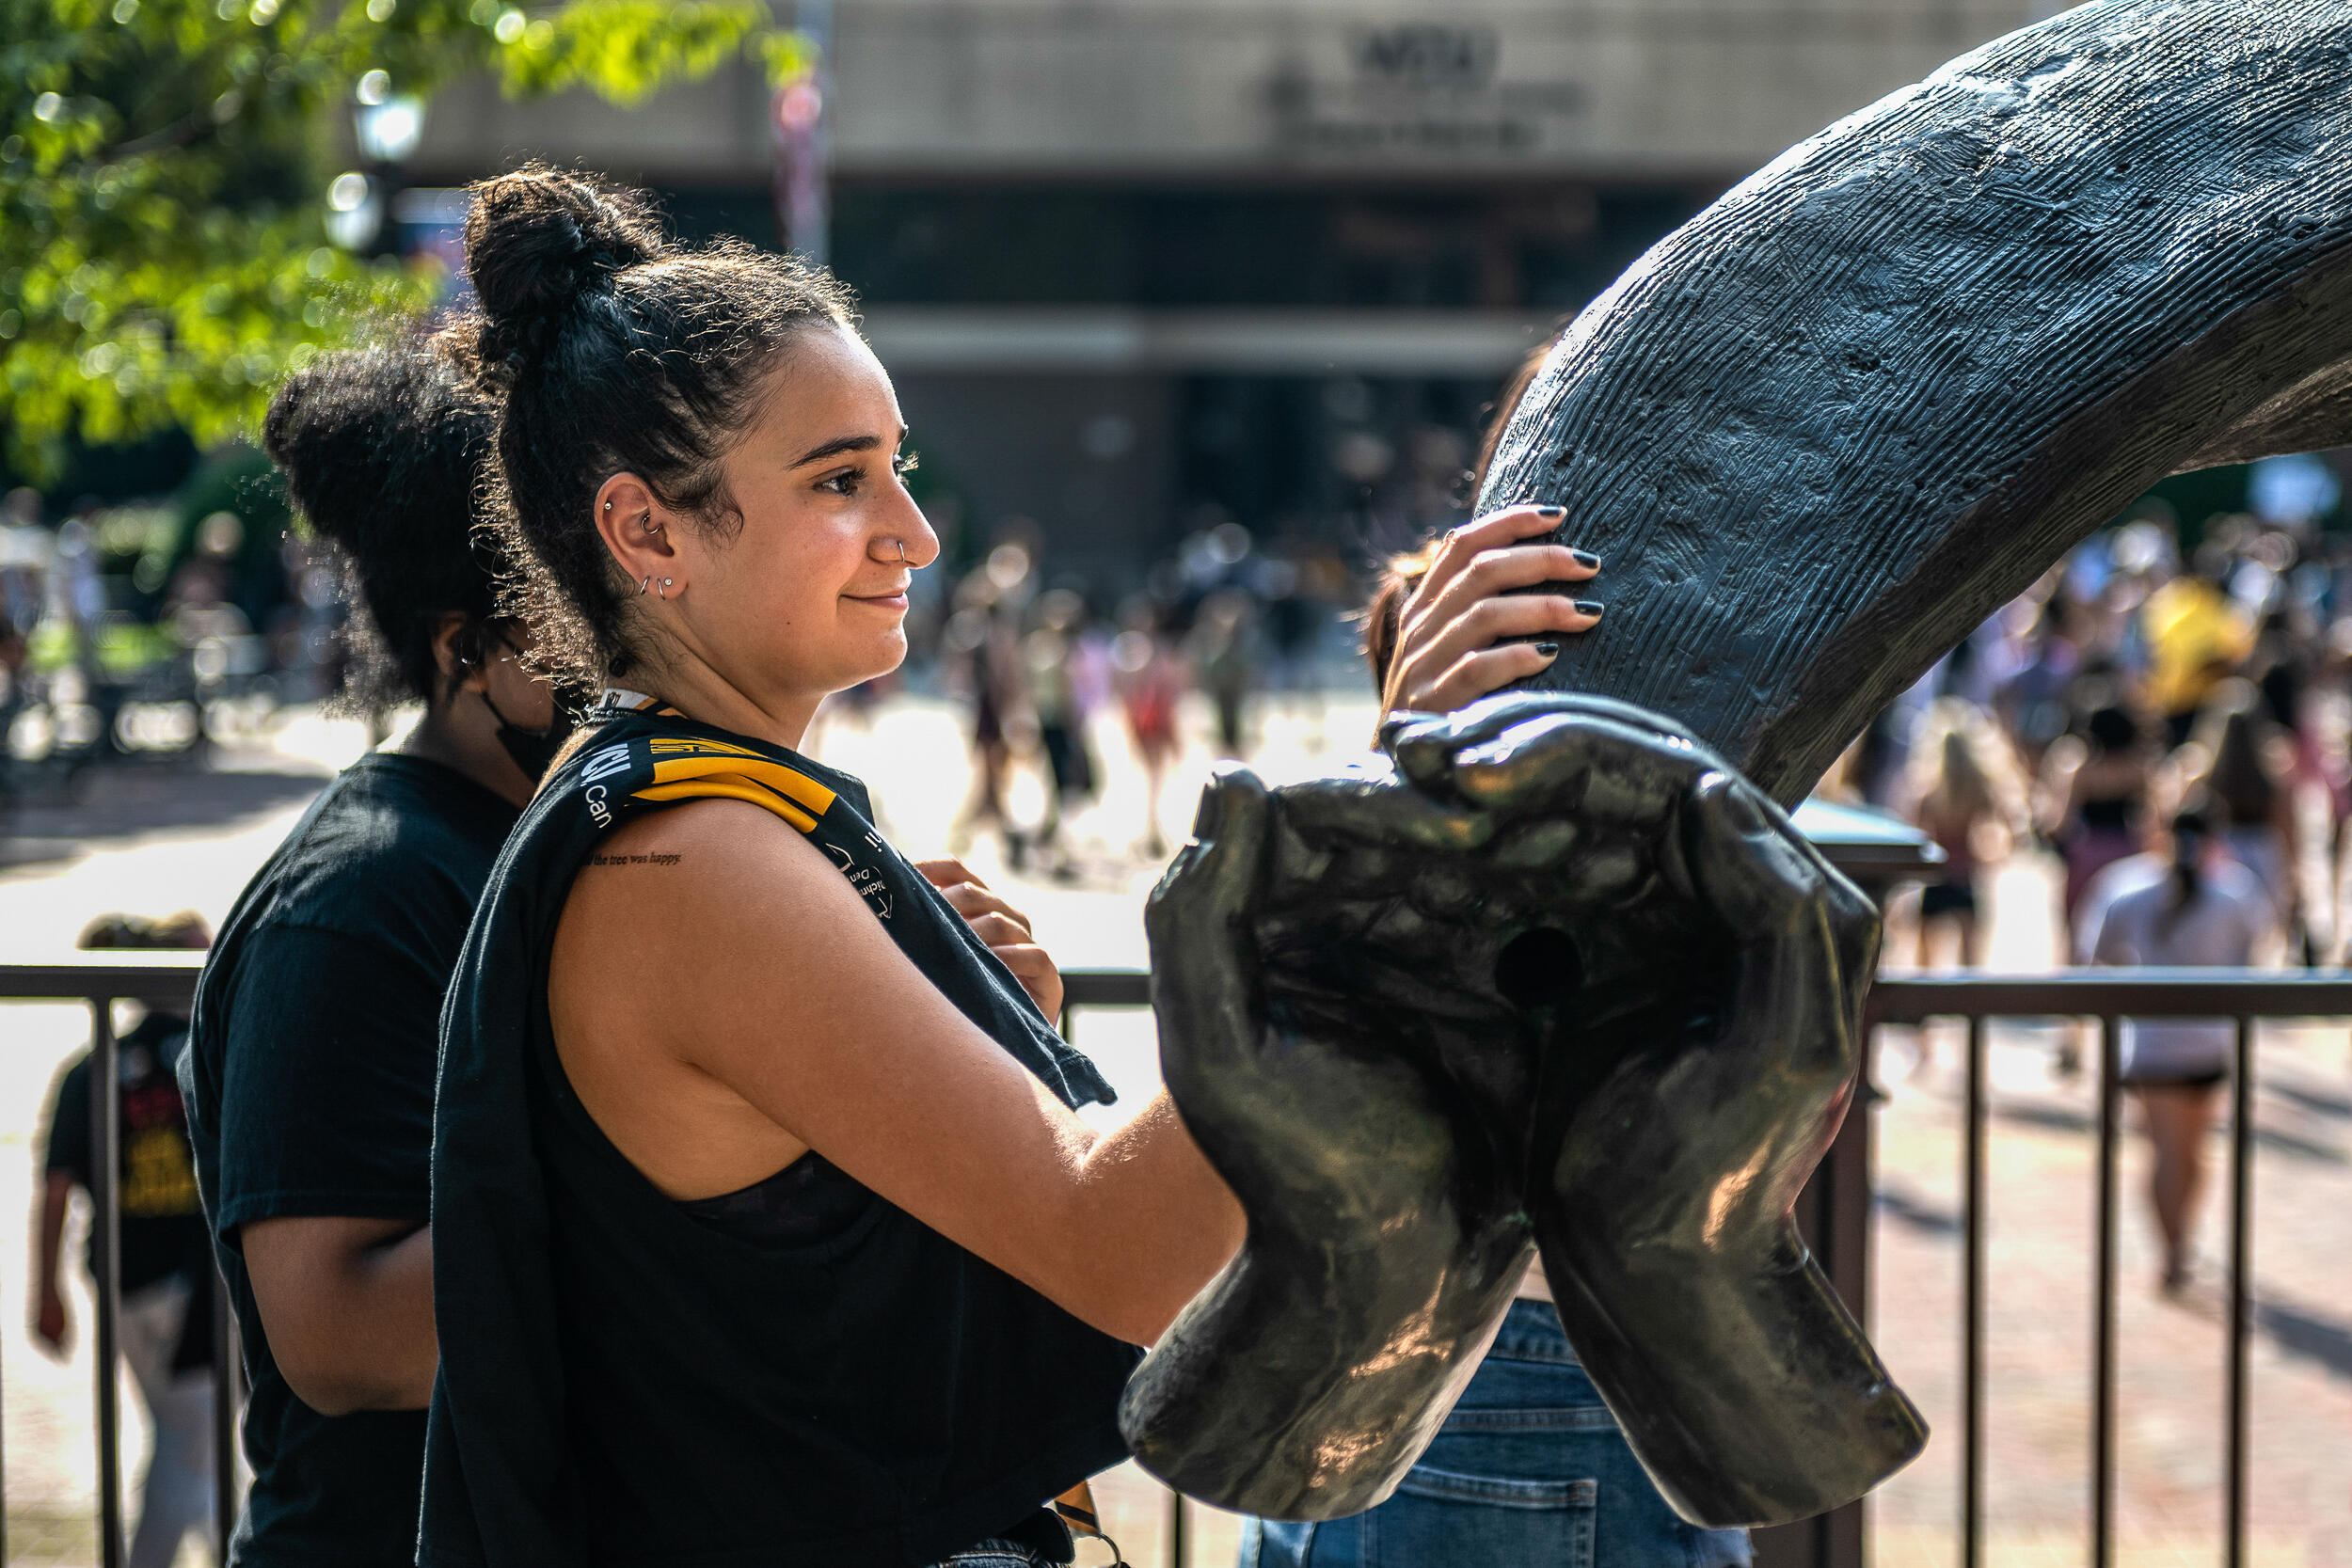 A student with hair in a bun and a New Student Orientation shirt over their shoulder rests a hand on a sculpture of ram horns in front of a plaza in the afternoon sun.